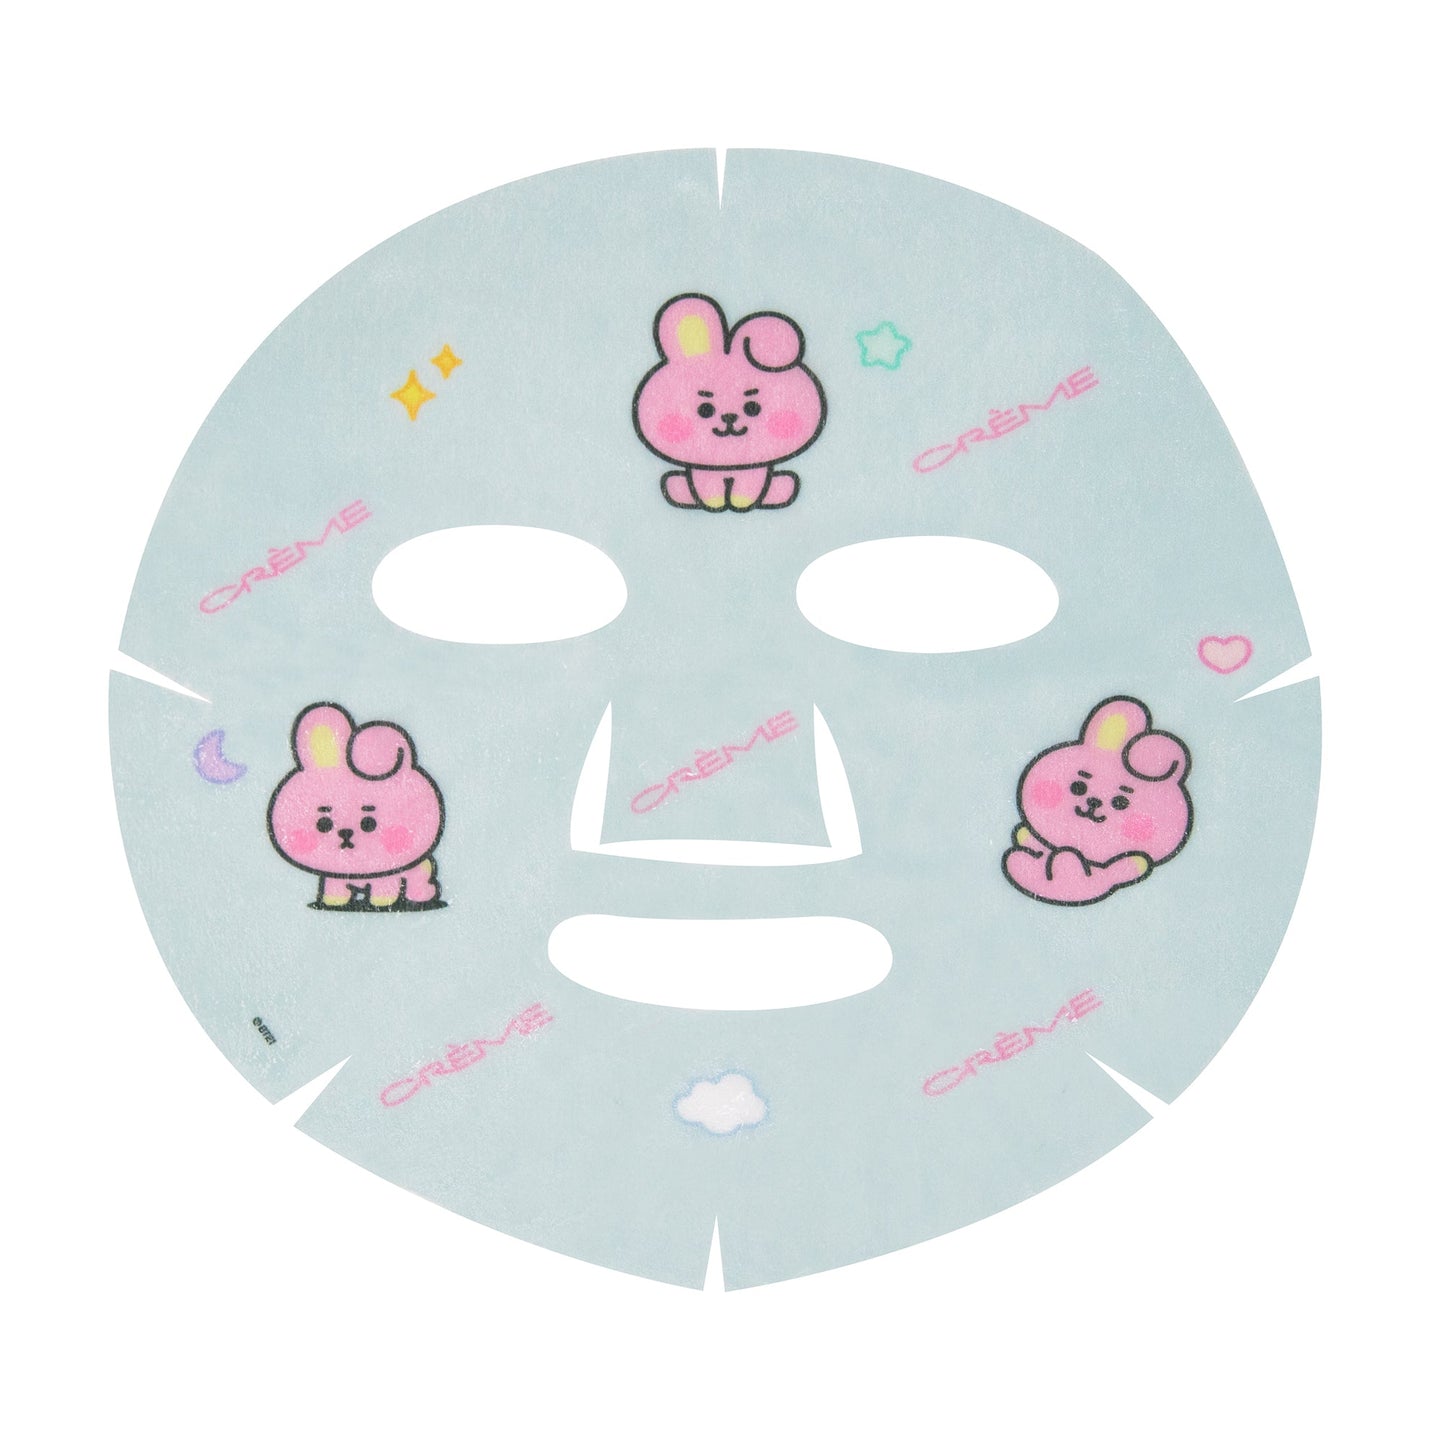 FLAWLESS Like Baby COOKY Printed Essence Sheet Mask (Squalane, Xylitol, Peach Ceramides) Sheet masks The Crème Shop x BT21 BABY 